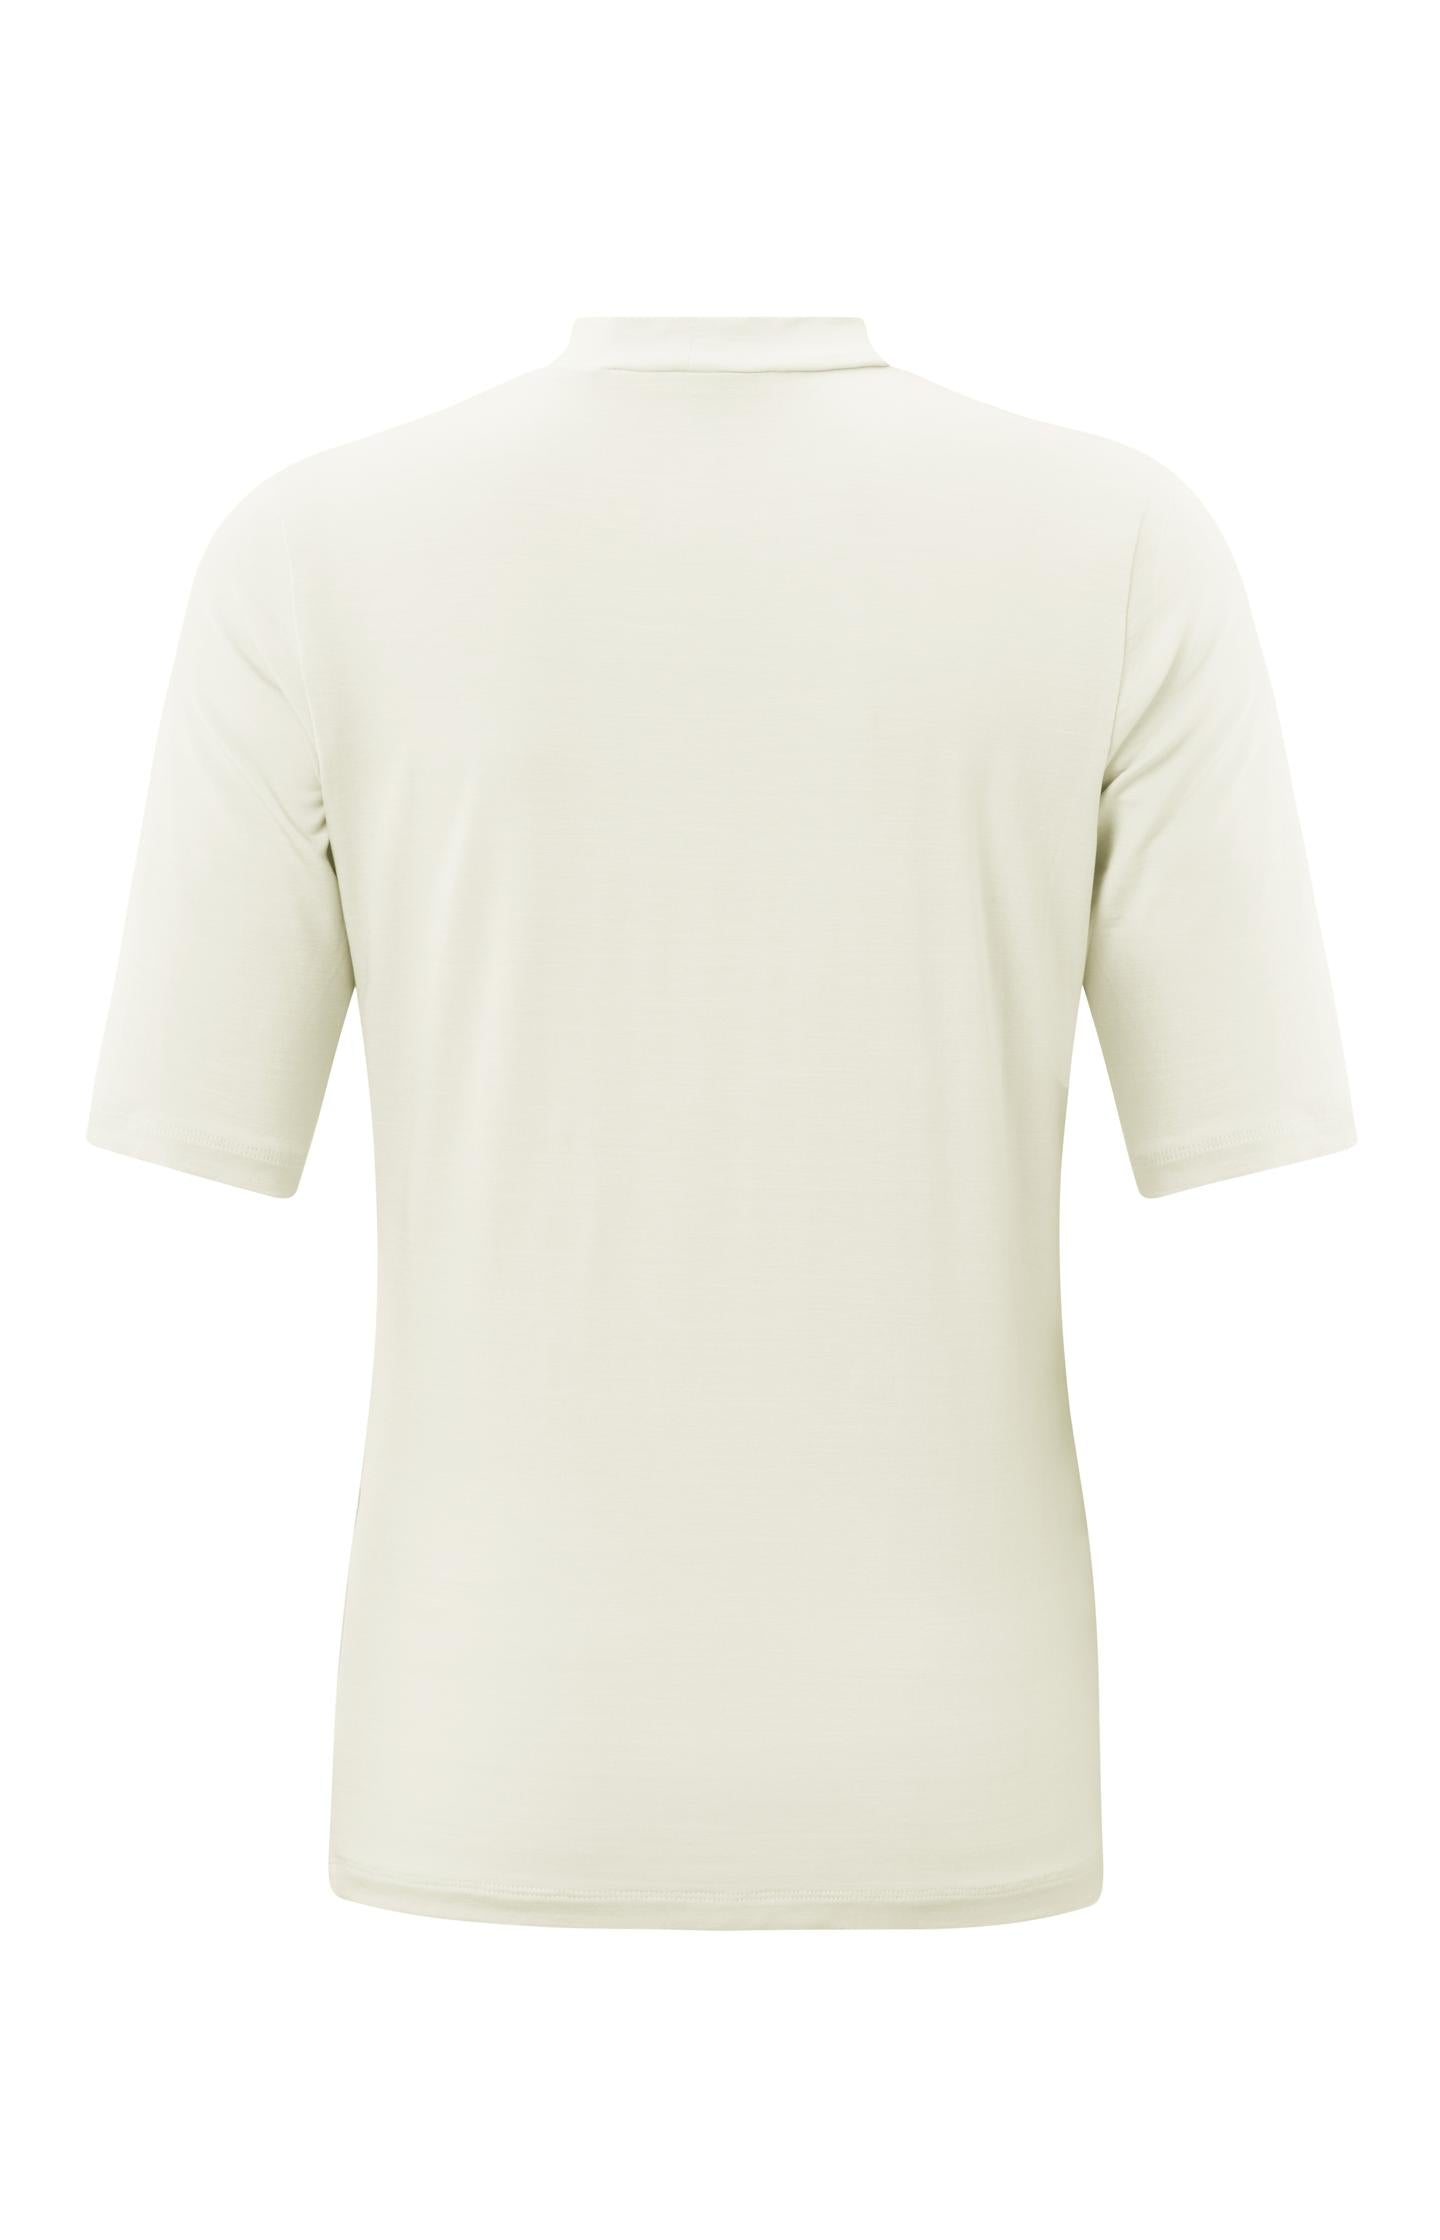 Soft T-shirt with turtleneck and short sleeve in regular fit